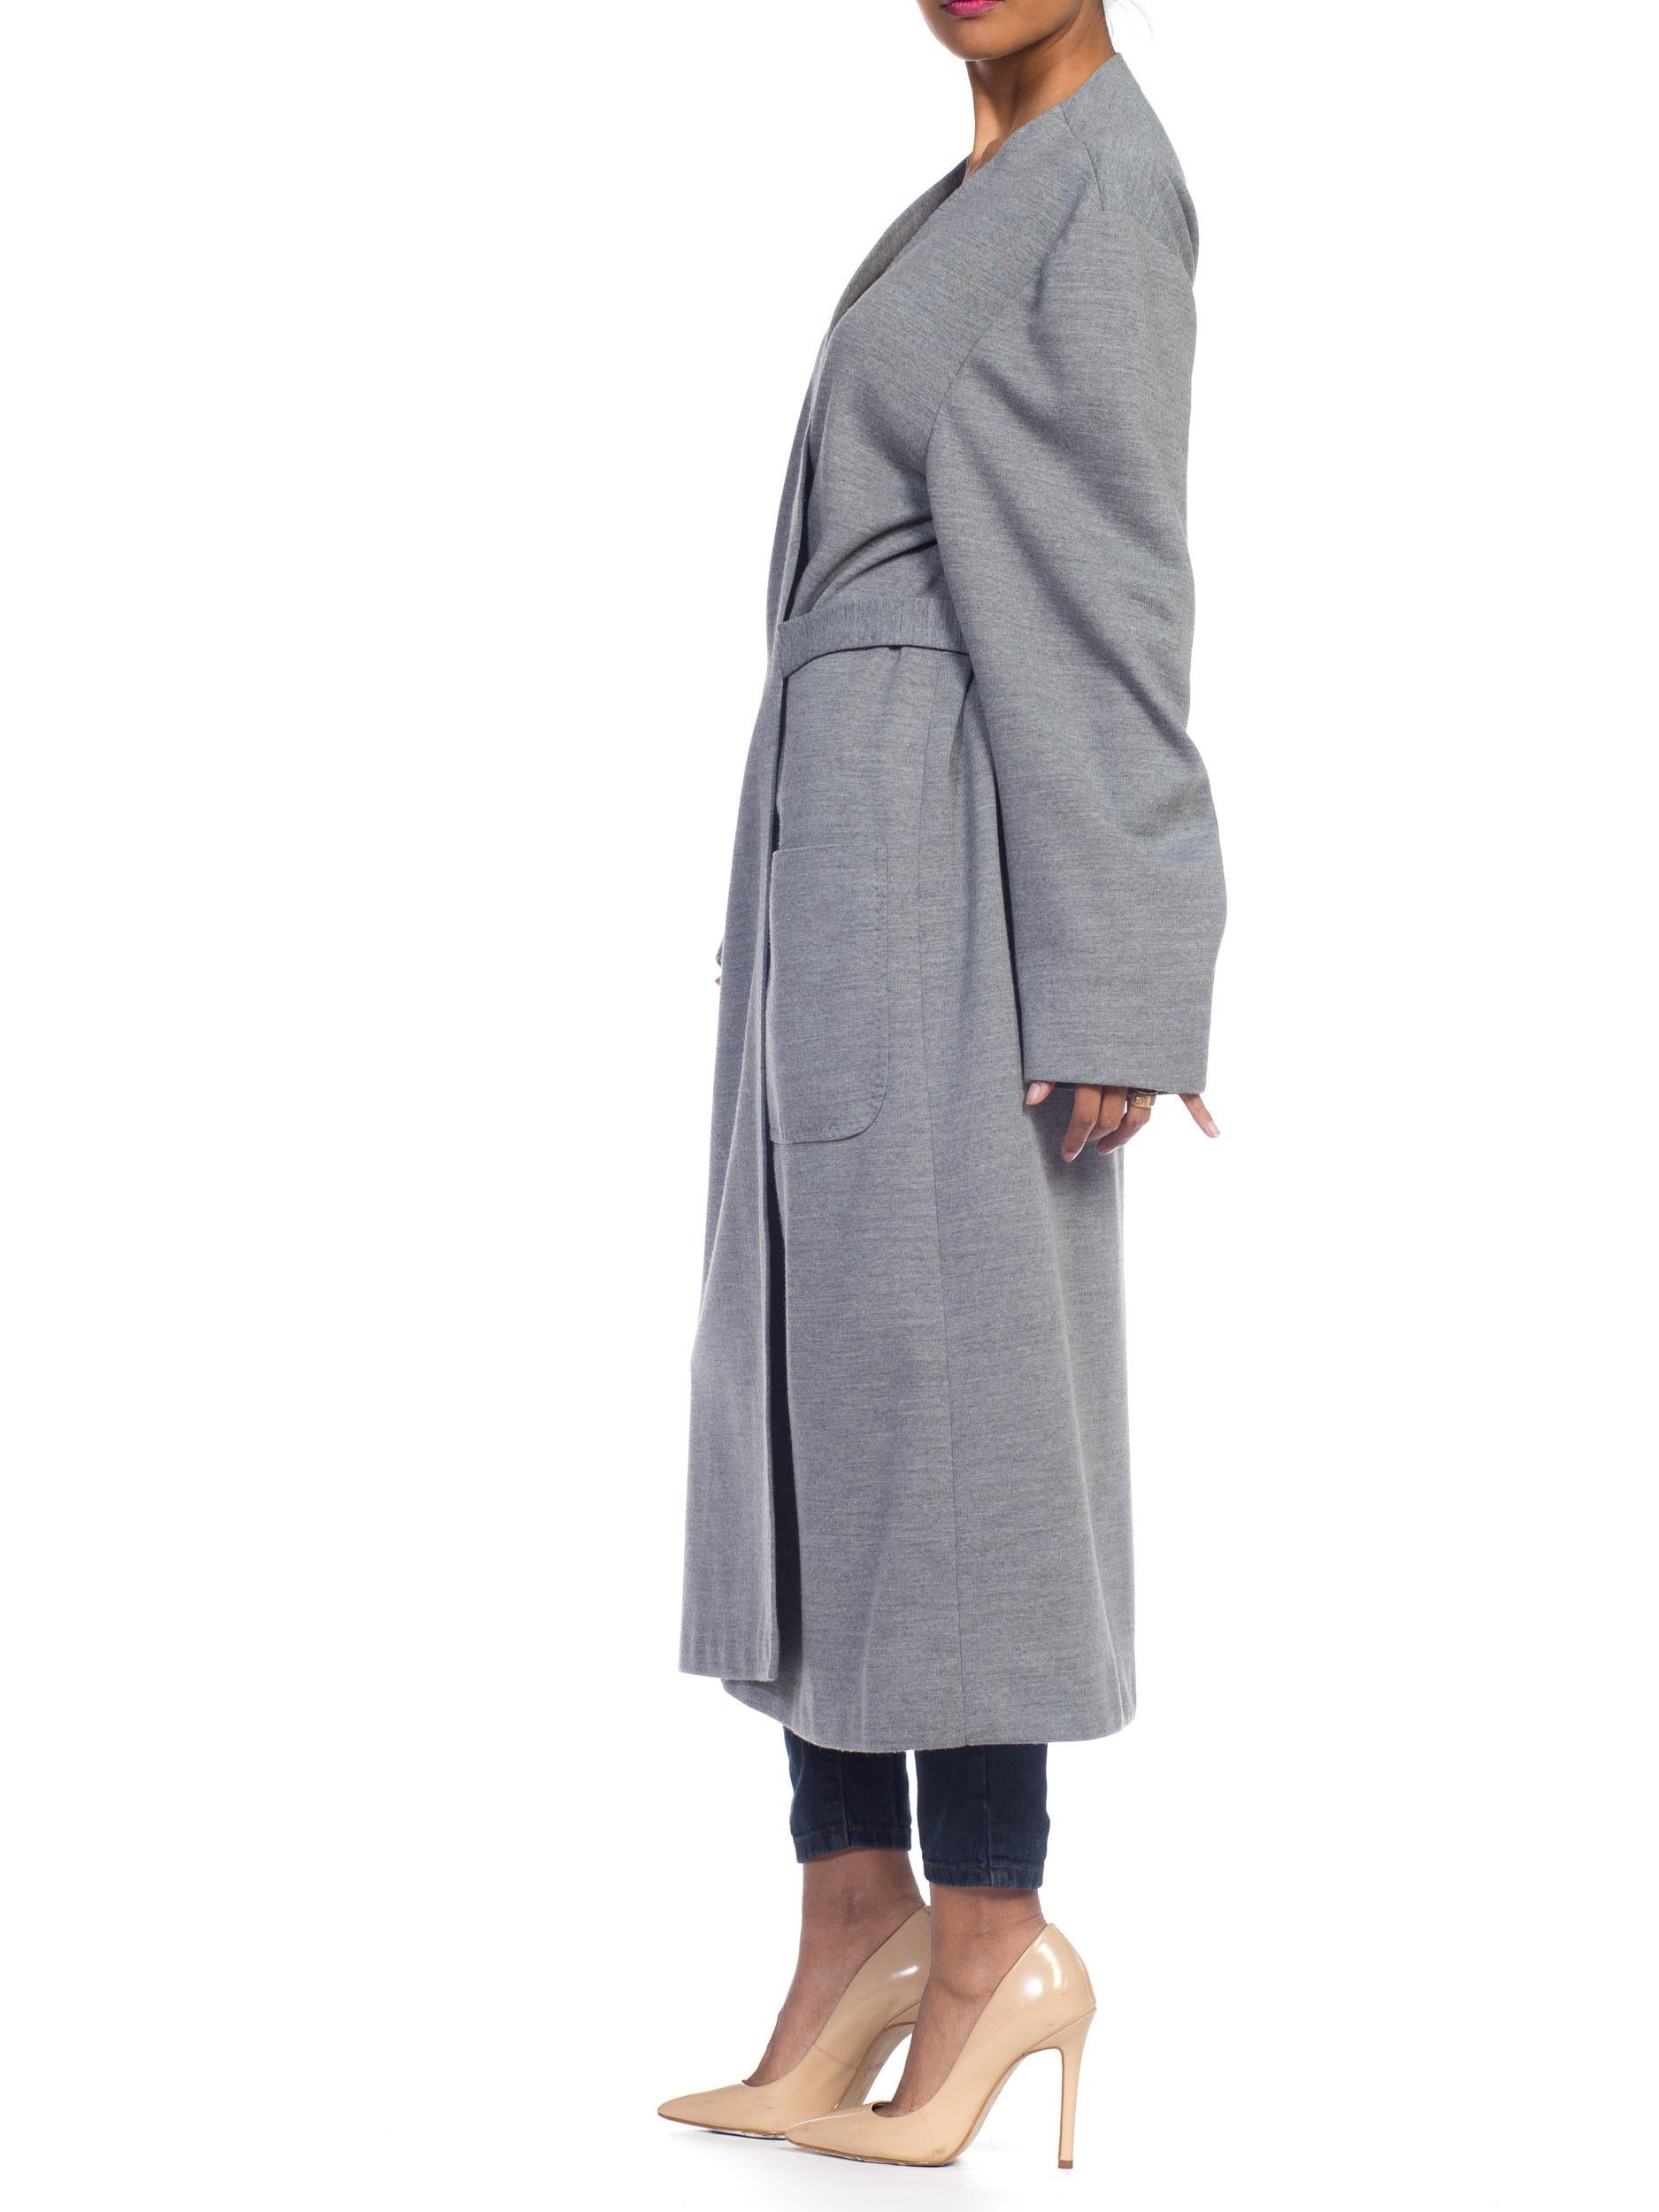 1980S Heather Grey Wool Knit Handmade Unlabeled Couture Wrap Sweater Coat For Sale 4